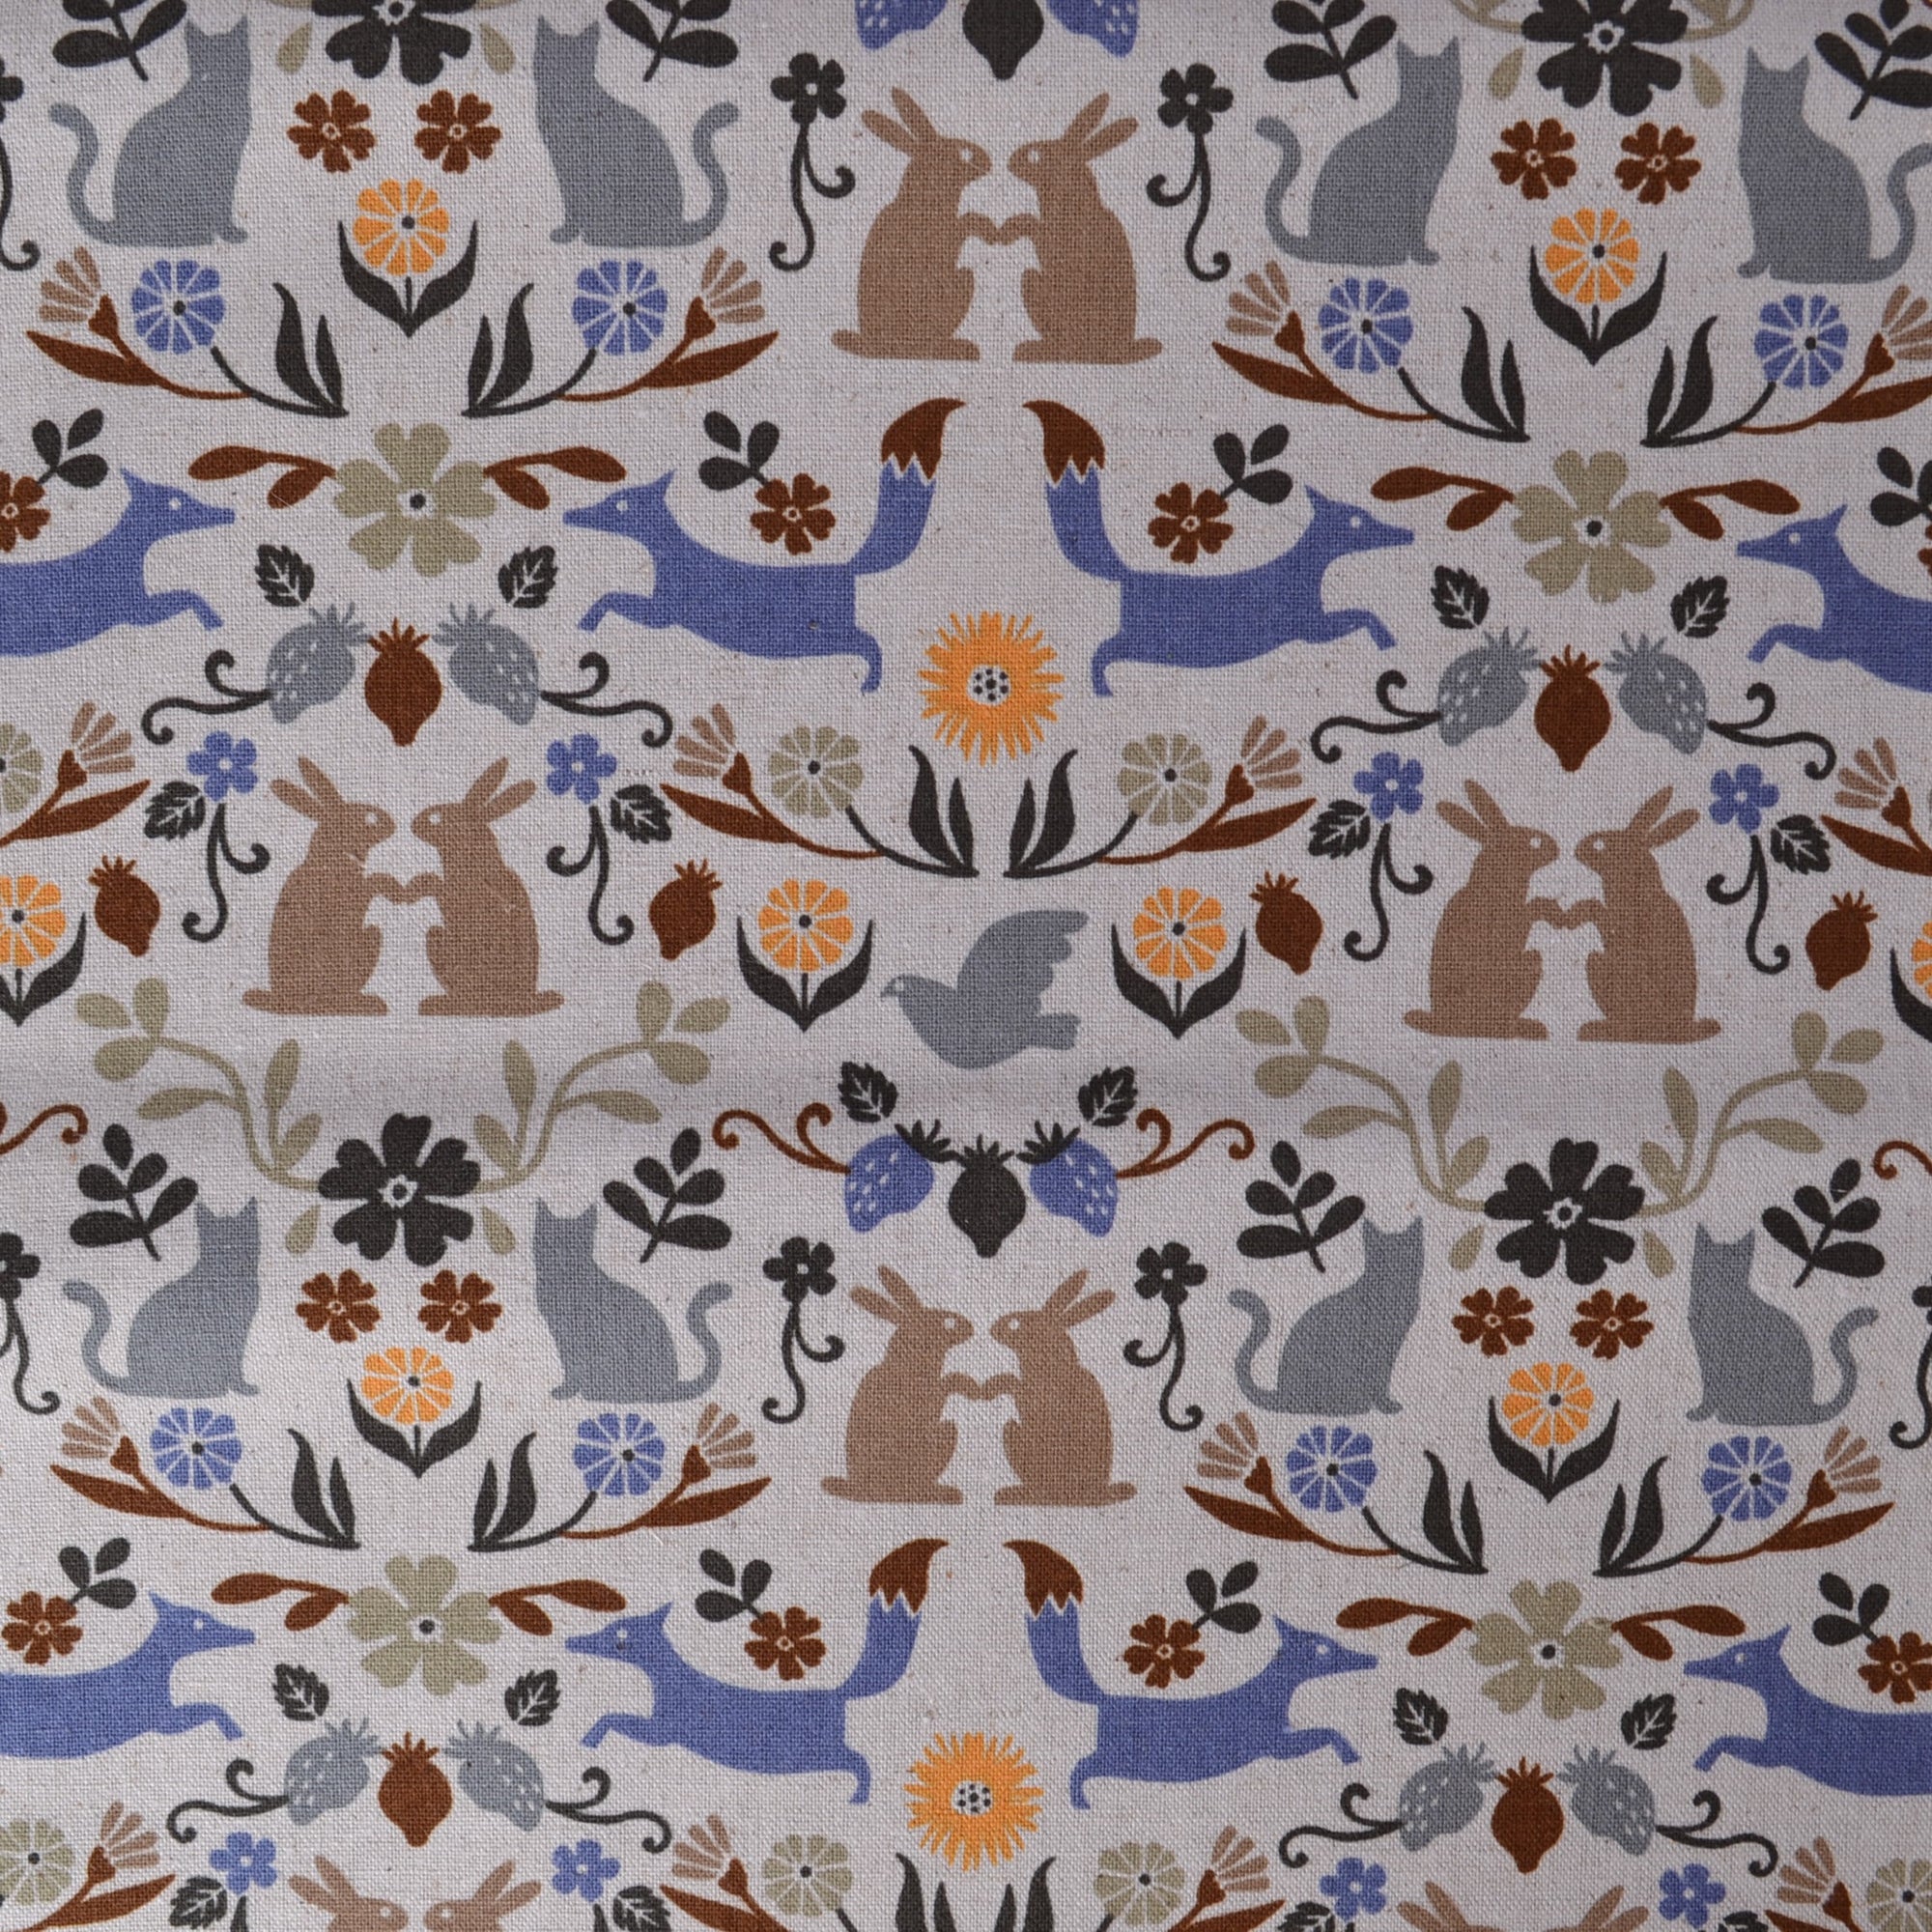 Cats, Rabbits, Foxes & Birds Fabric, Taupe & Blue